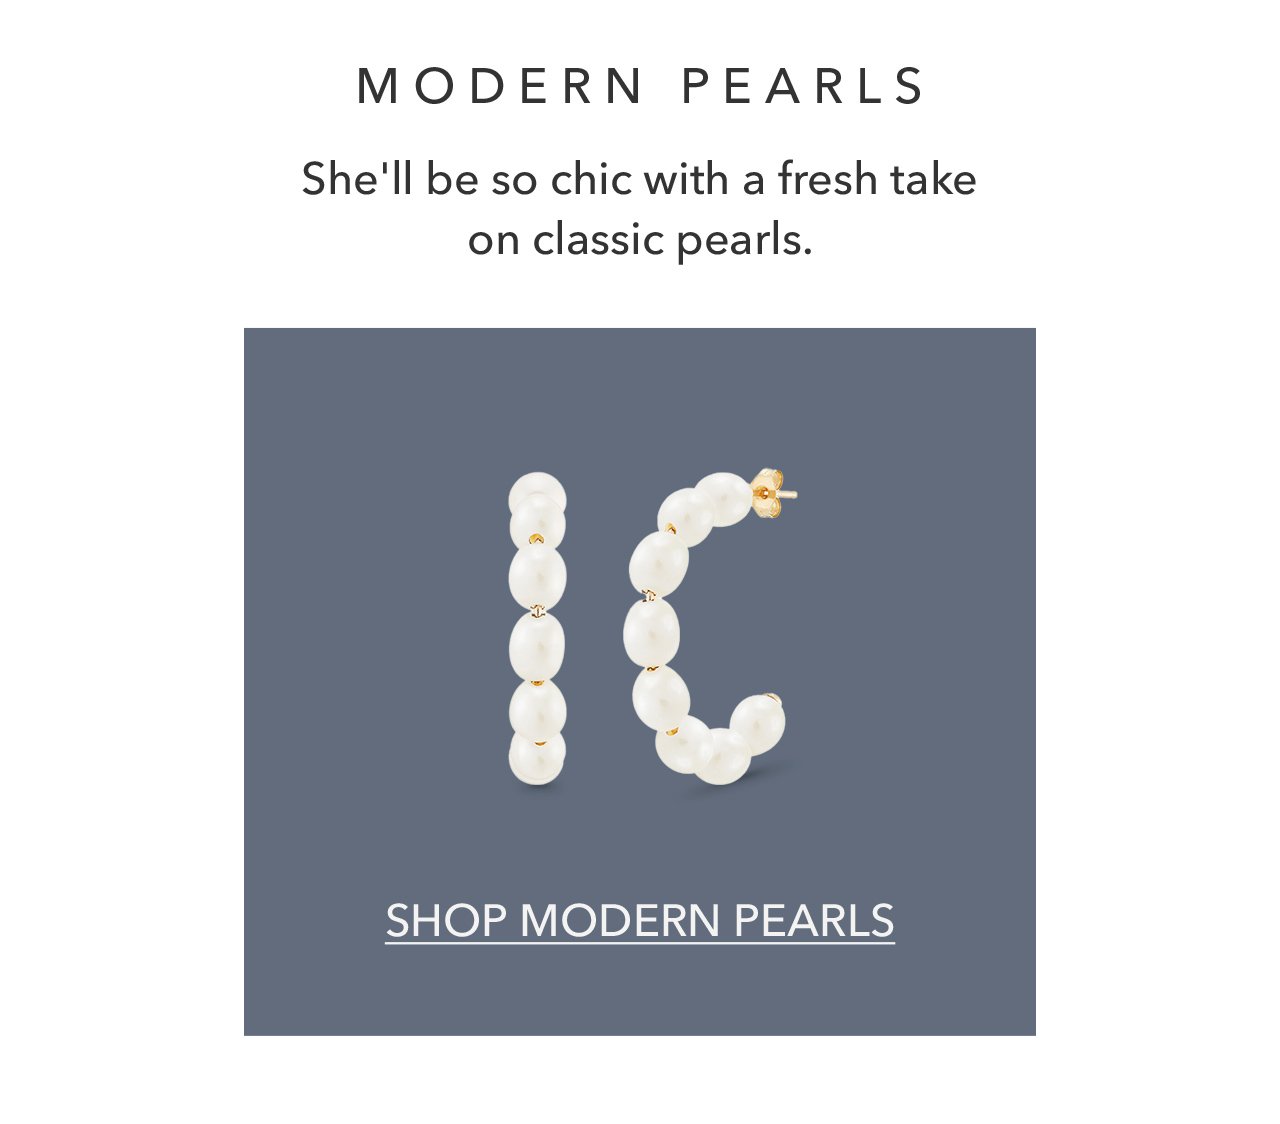 MODERN PEARLS She'll be so chic with a fresh take on classic pearls. SHOP MODERN PEARLS